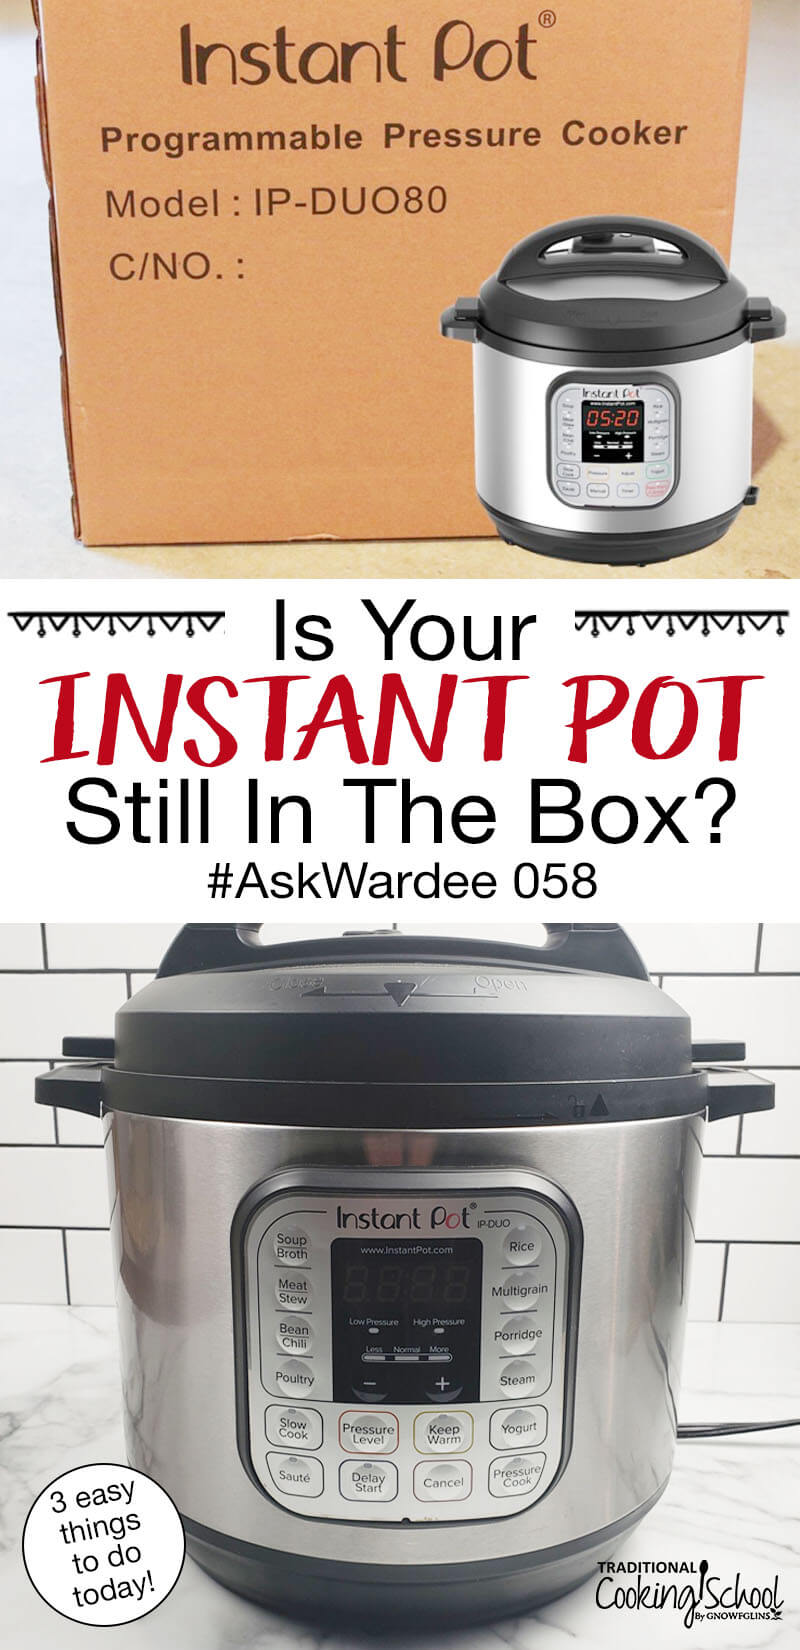 Photo collage of an Instant Pot on the countertop, and an unopened cardboard box labeled "Instant Pot Programmable Pressure Cooker". Text overlay says, "Is Your Instant Pot Still In The Box? #AskWardee 058 (3 things you can do today!)"